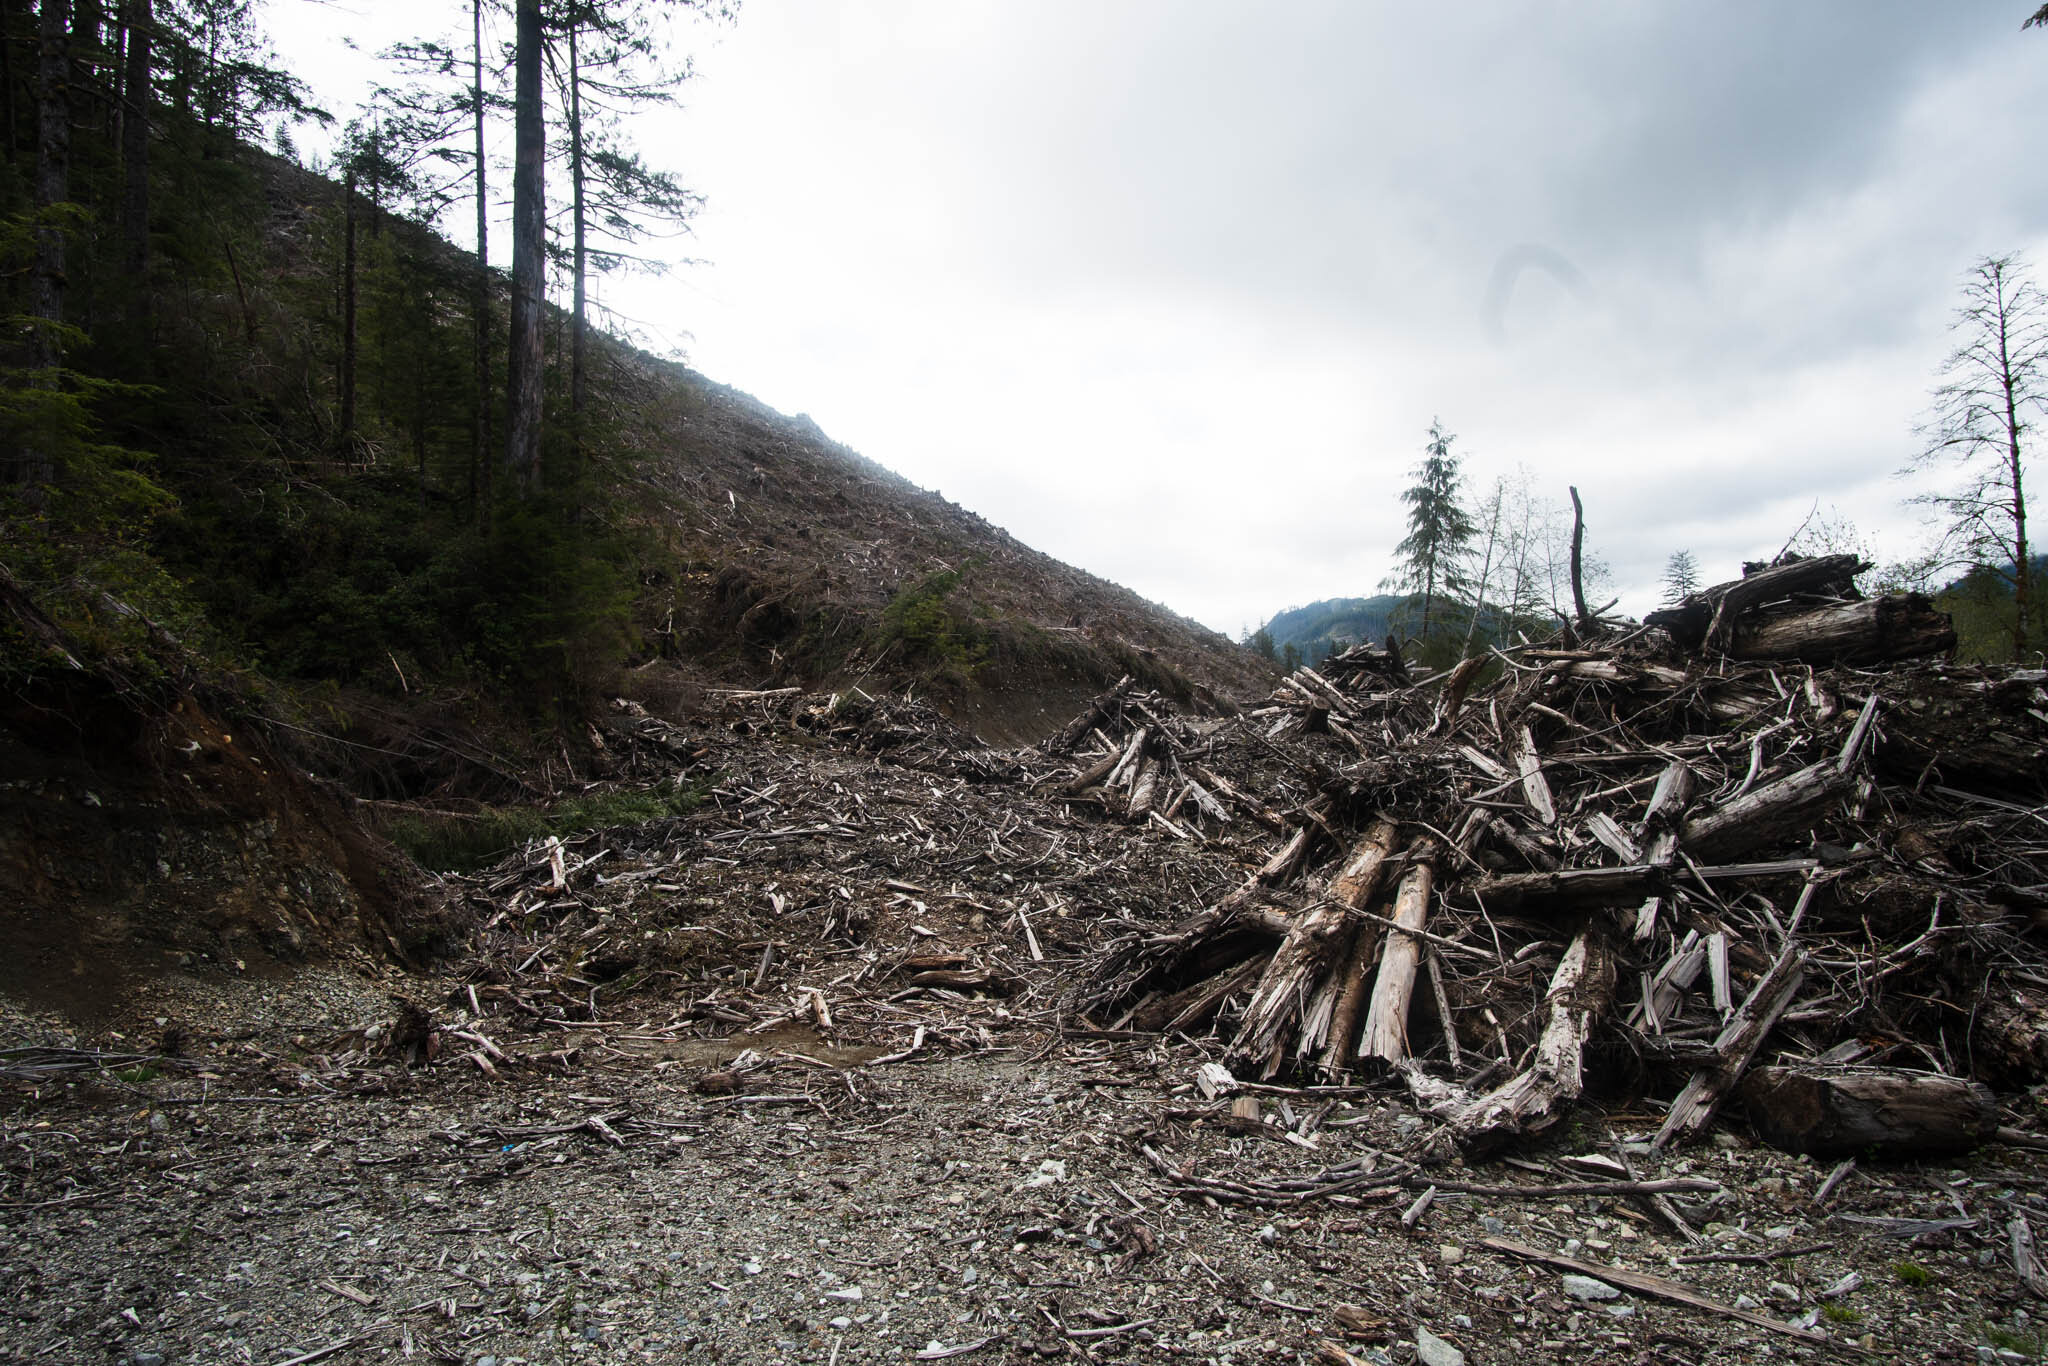  many rivers have turned into land slides because of clear cut logging. 